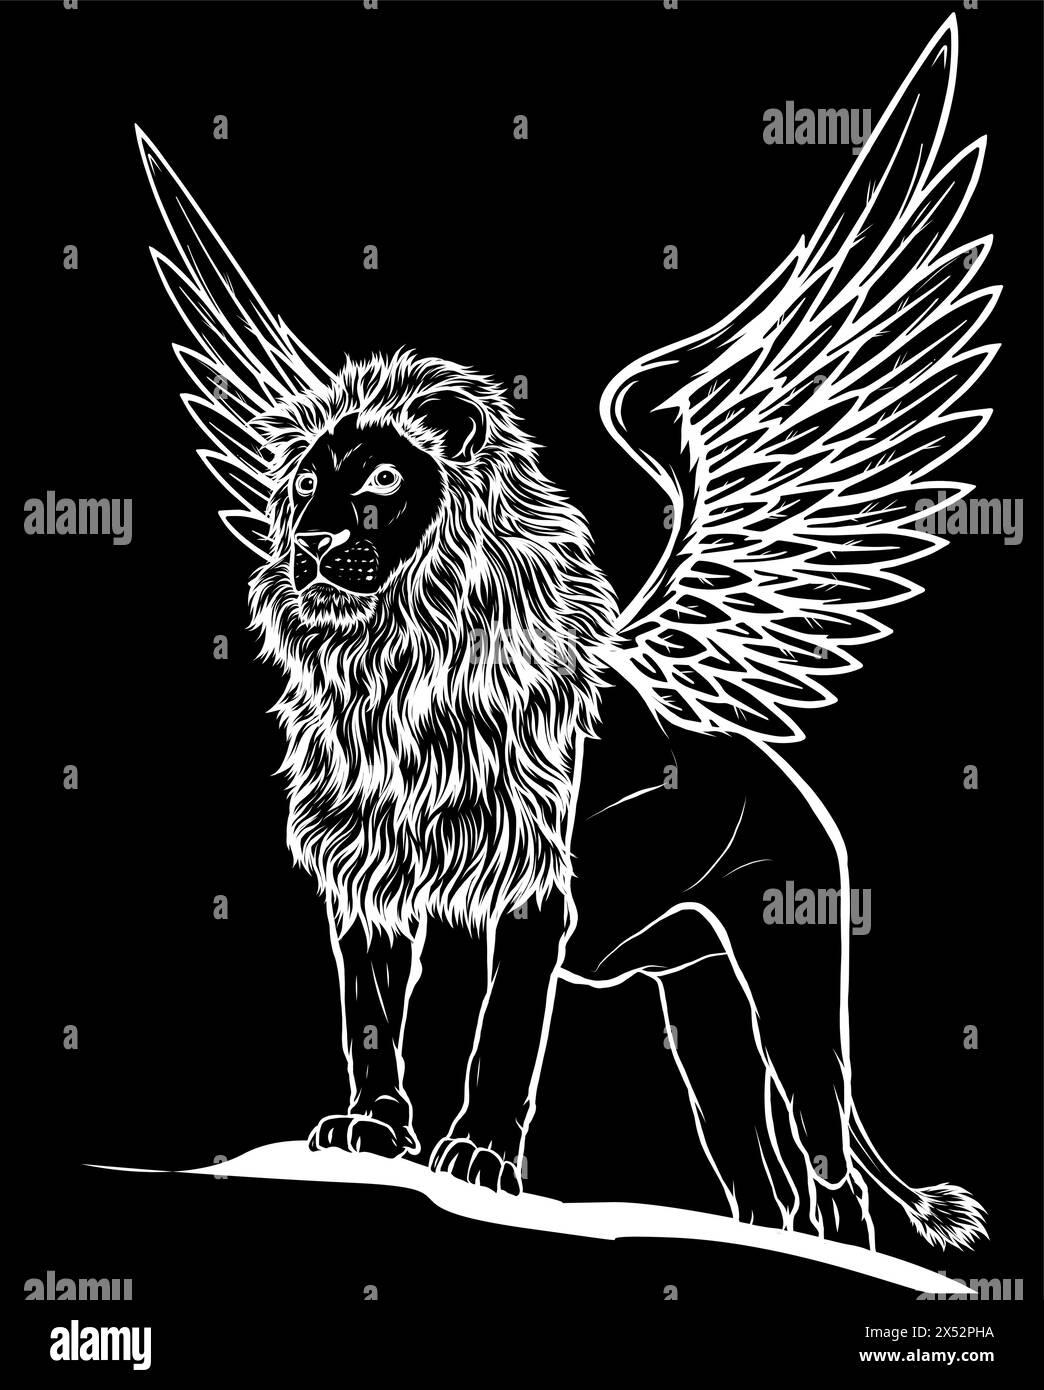 white silhouette of Winged Lion on black background vector design Stock Vector